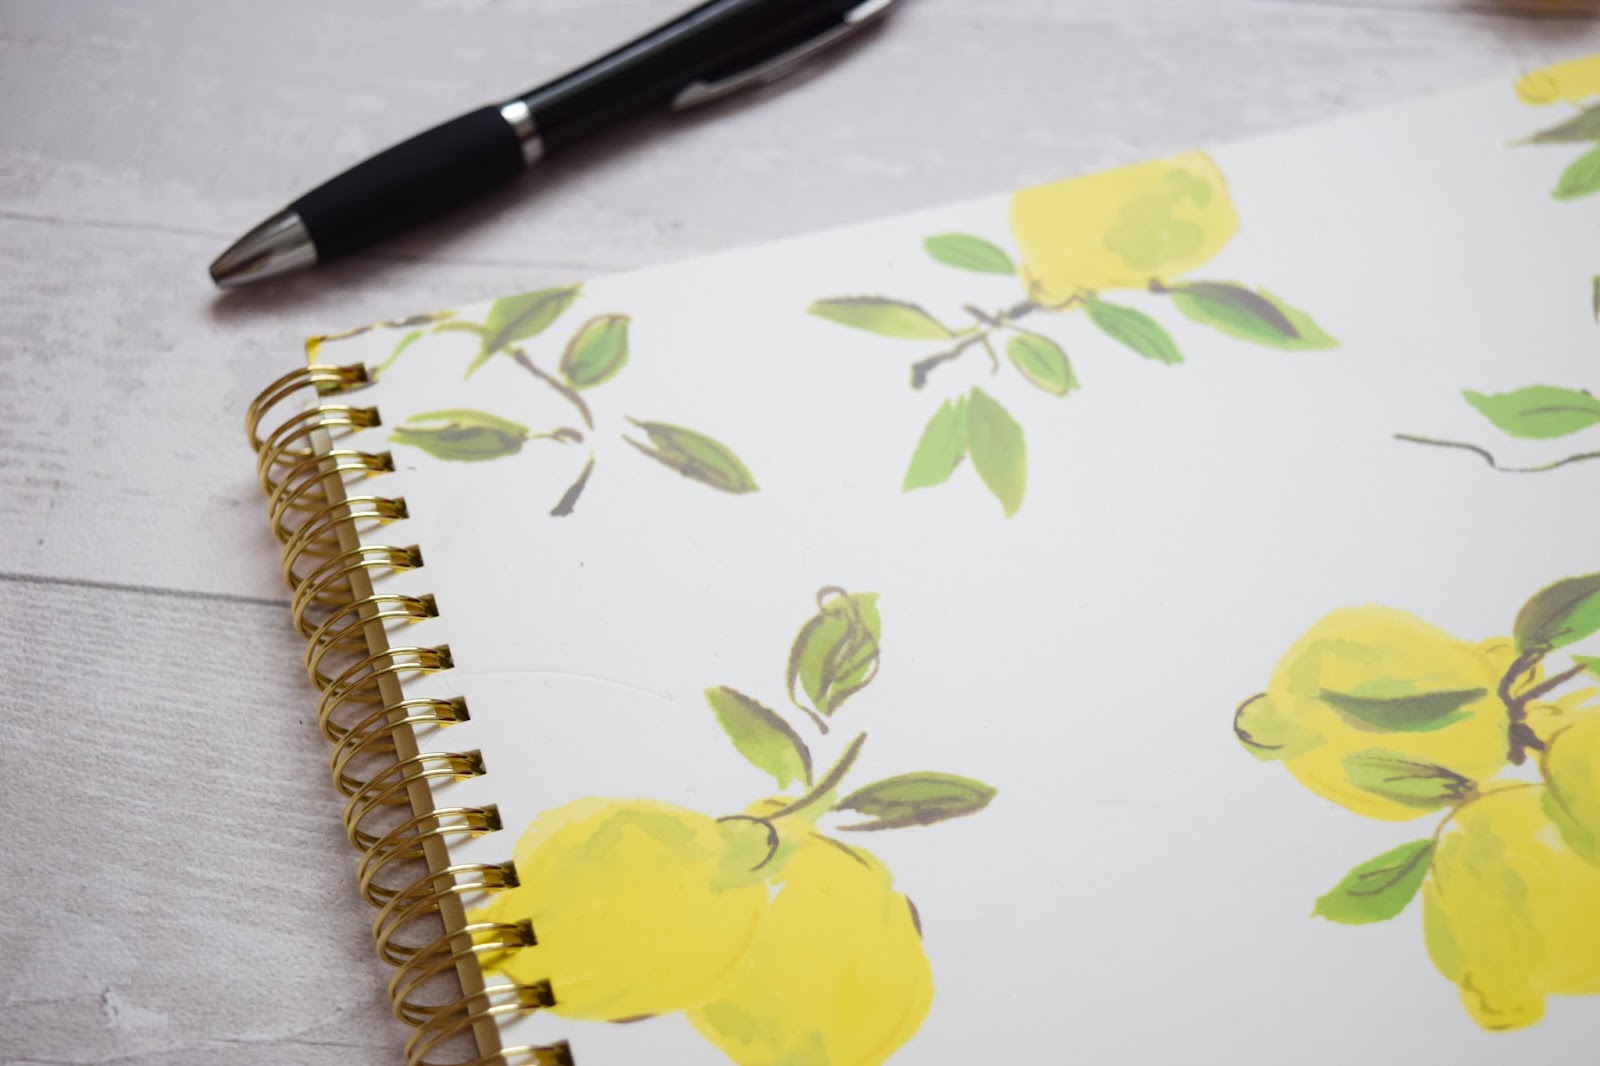 Stationery | Kate Spade Lemon Spiral Notebook | At Home With Cat